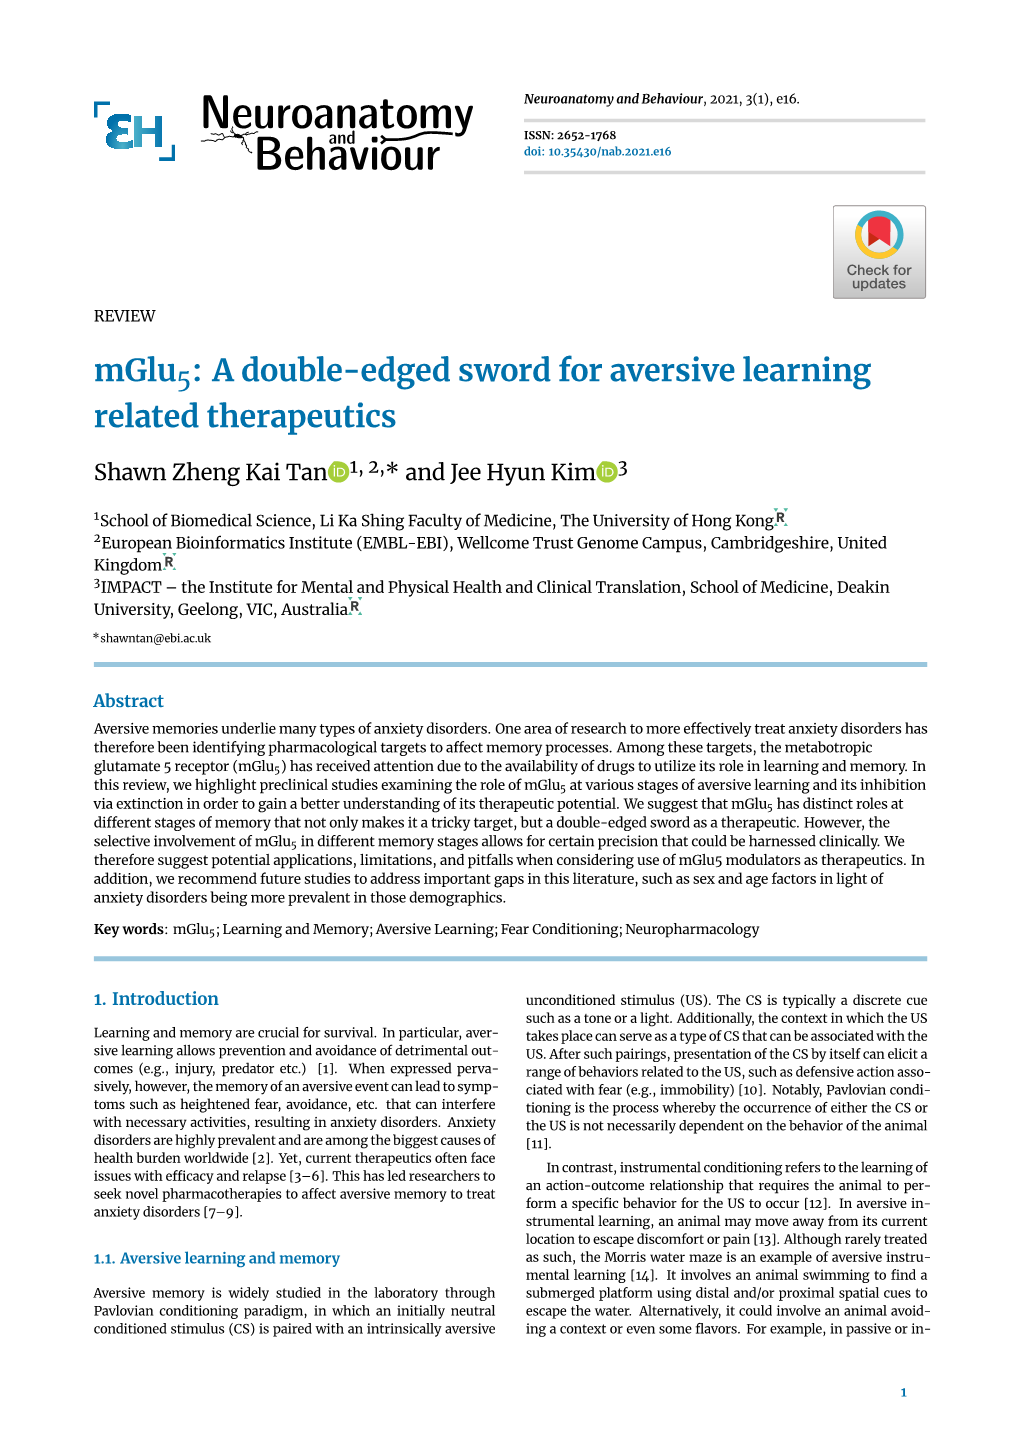 Mglu5: a Double-Edged Sword for Aversive Learning Related Therapeutics